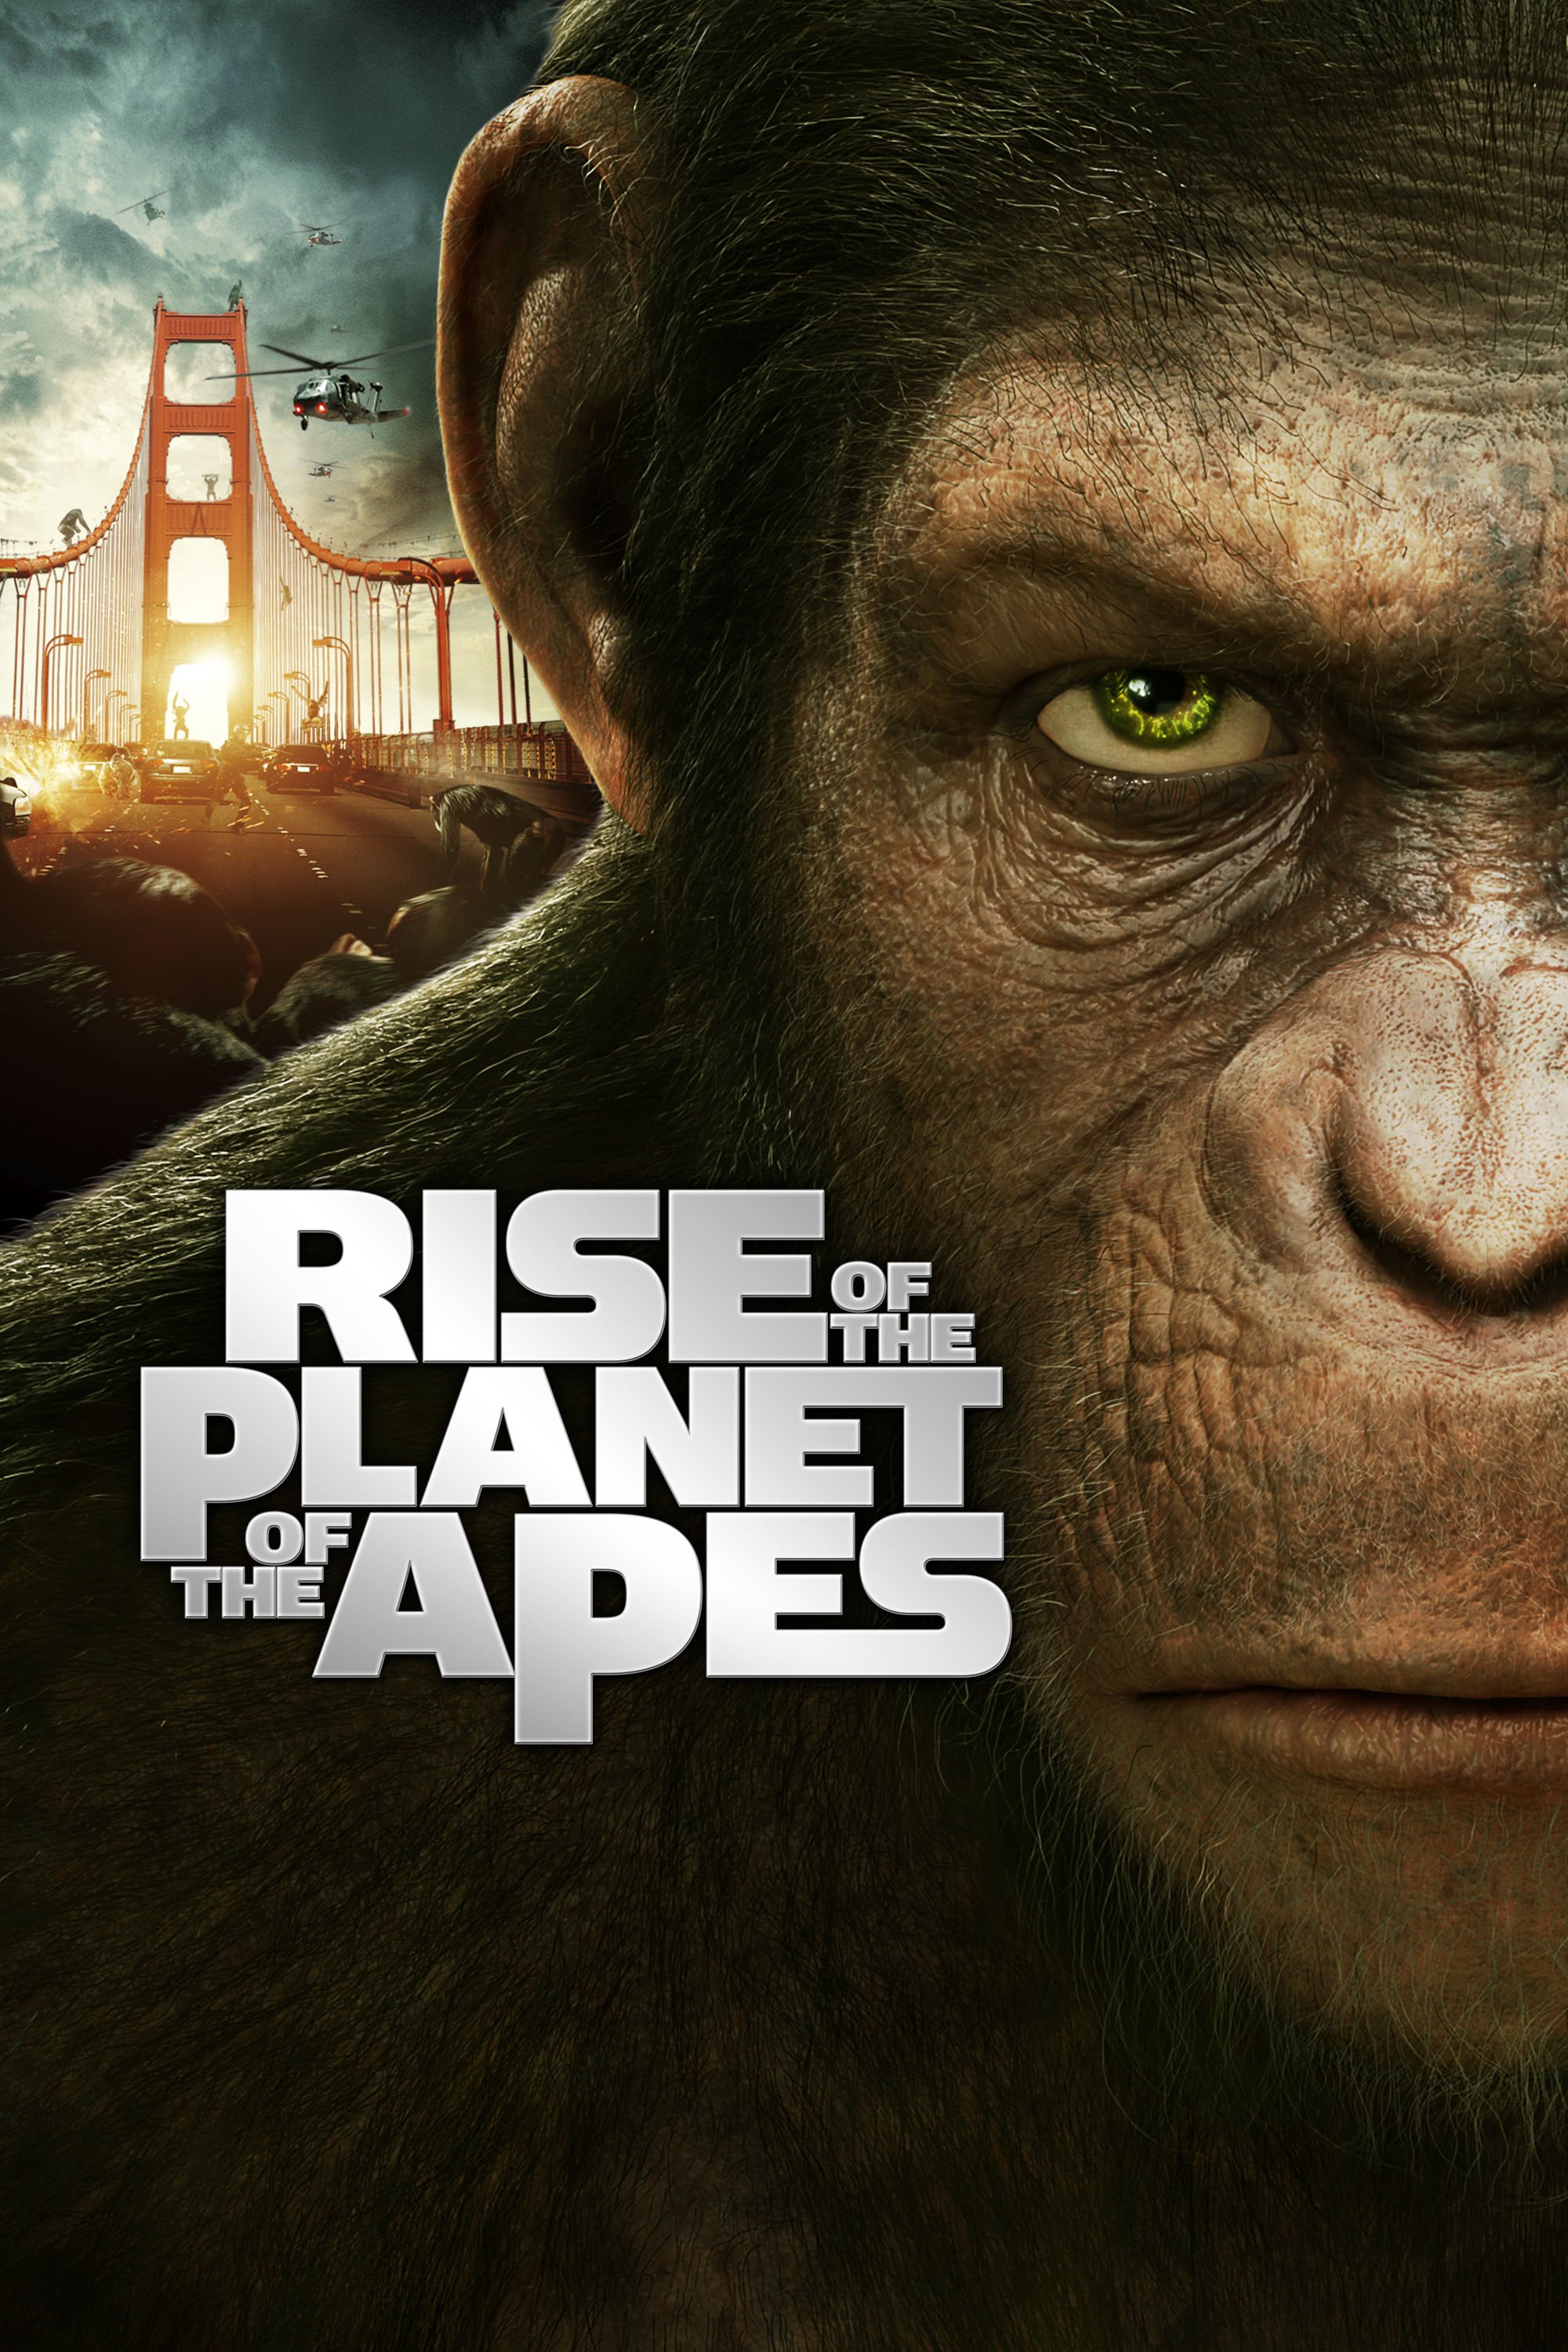 rise-of-the-planet-of-the-apes-filming-locations-itunes-poster